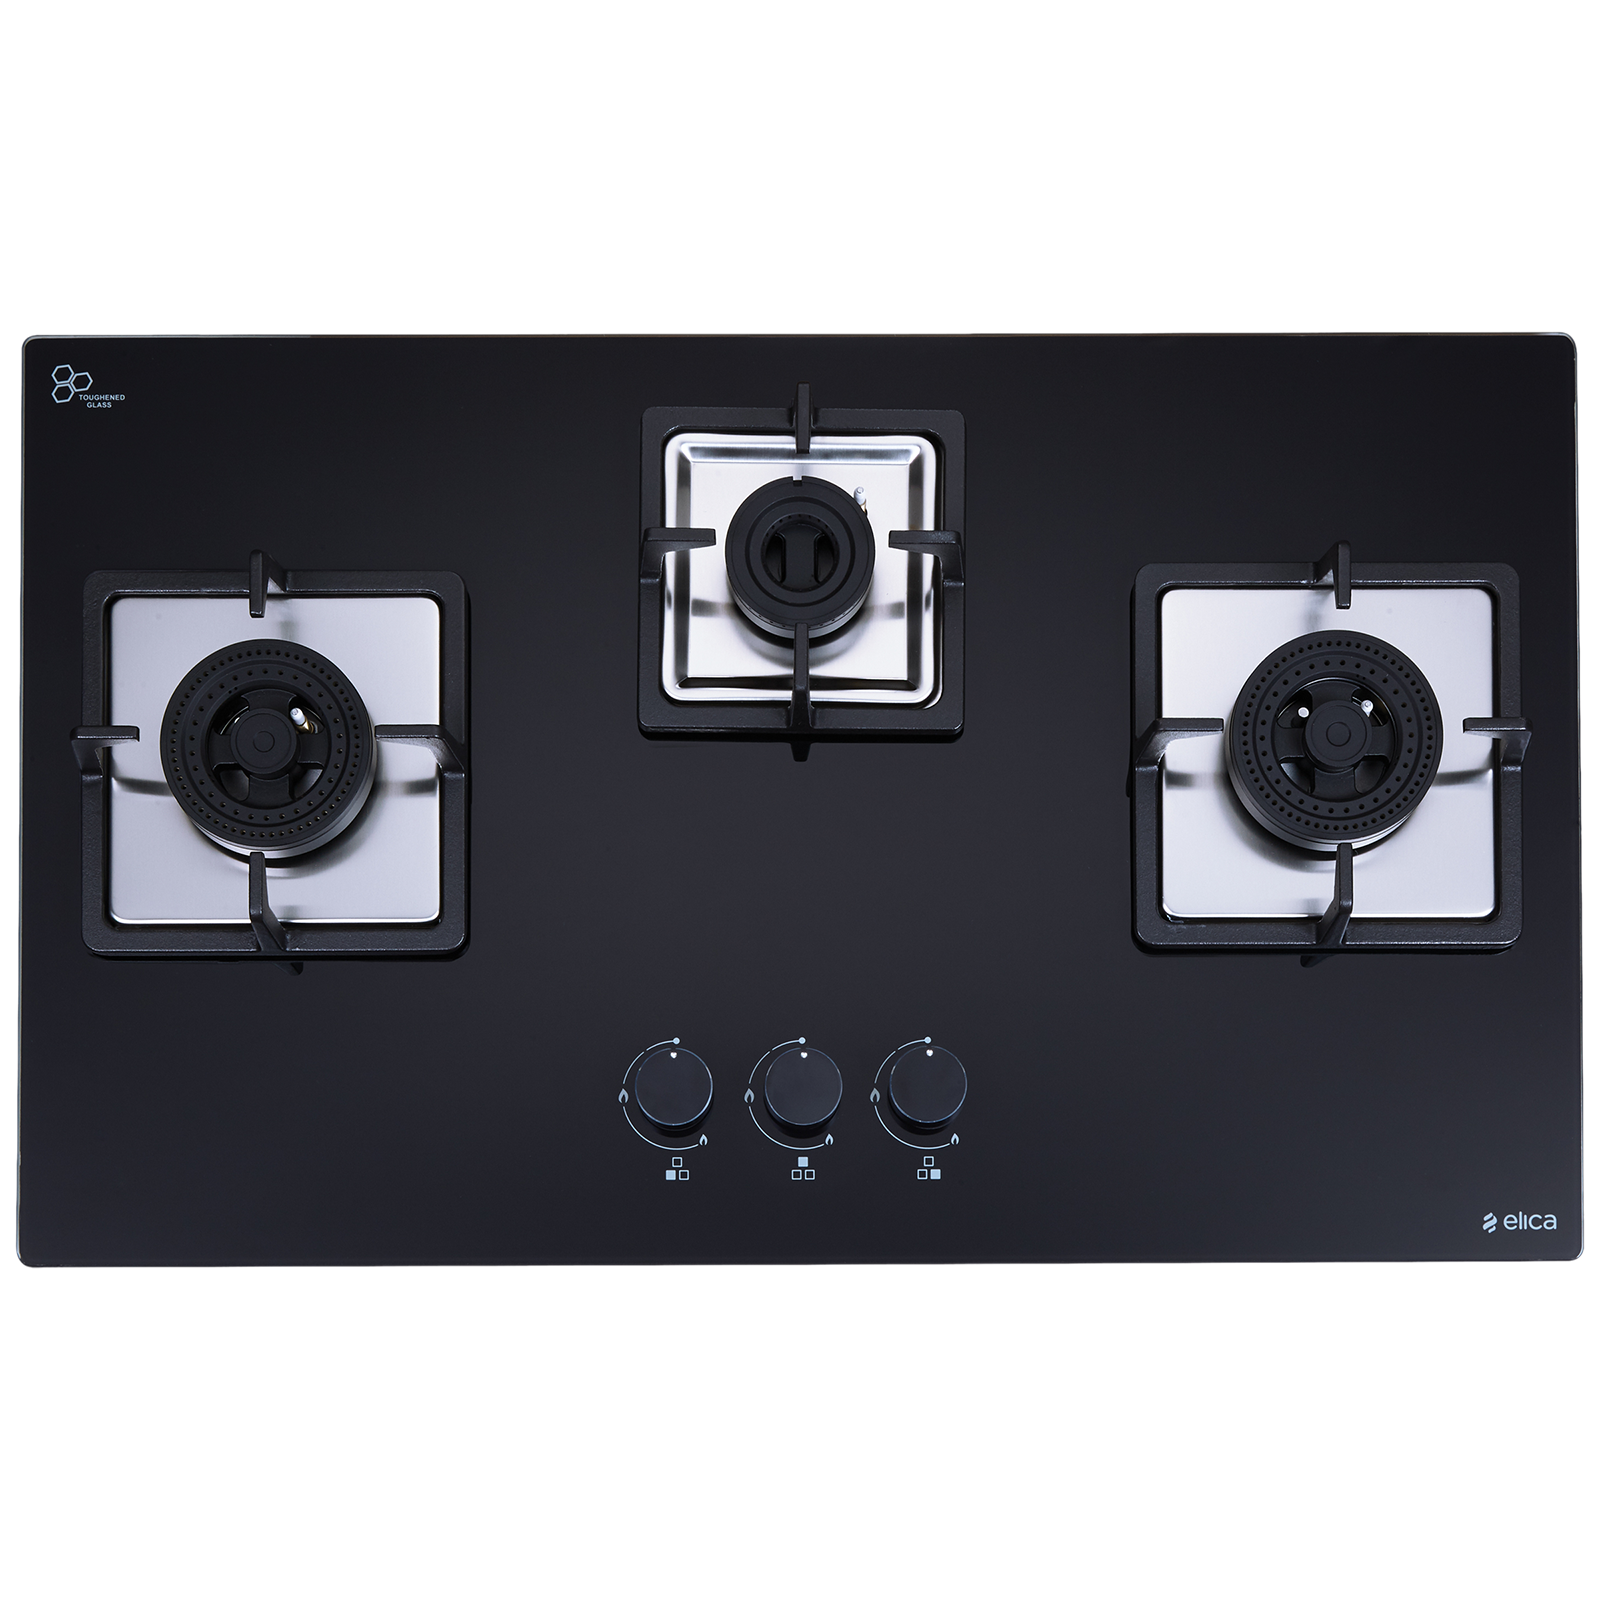 elica IND FLEXI AB DFS Series 3 Burner Automatic Hob (Battery Operated, Black)